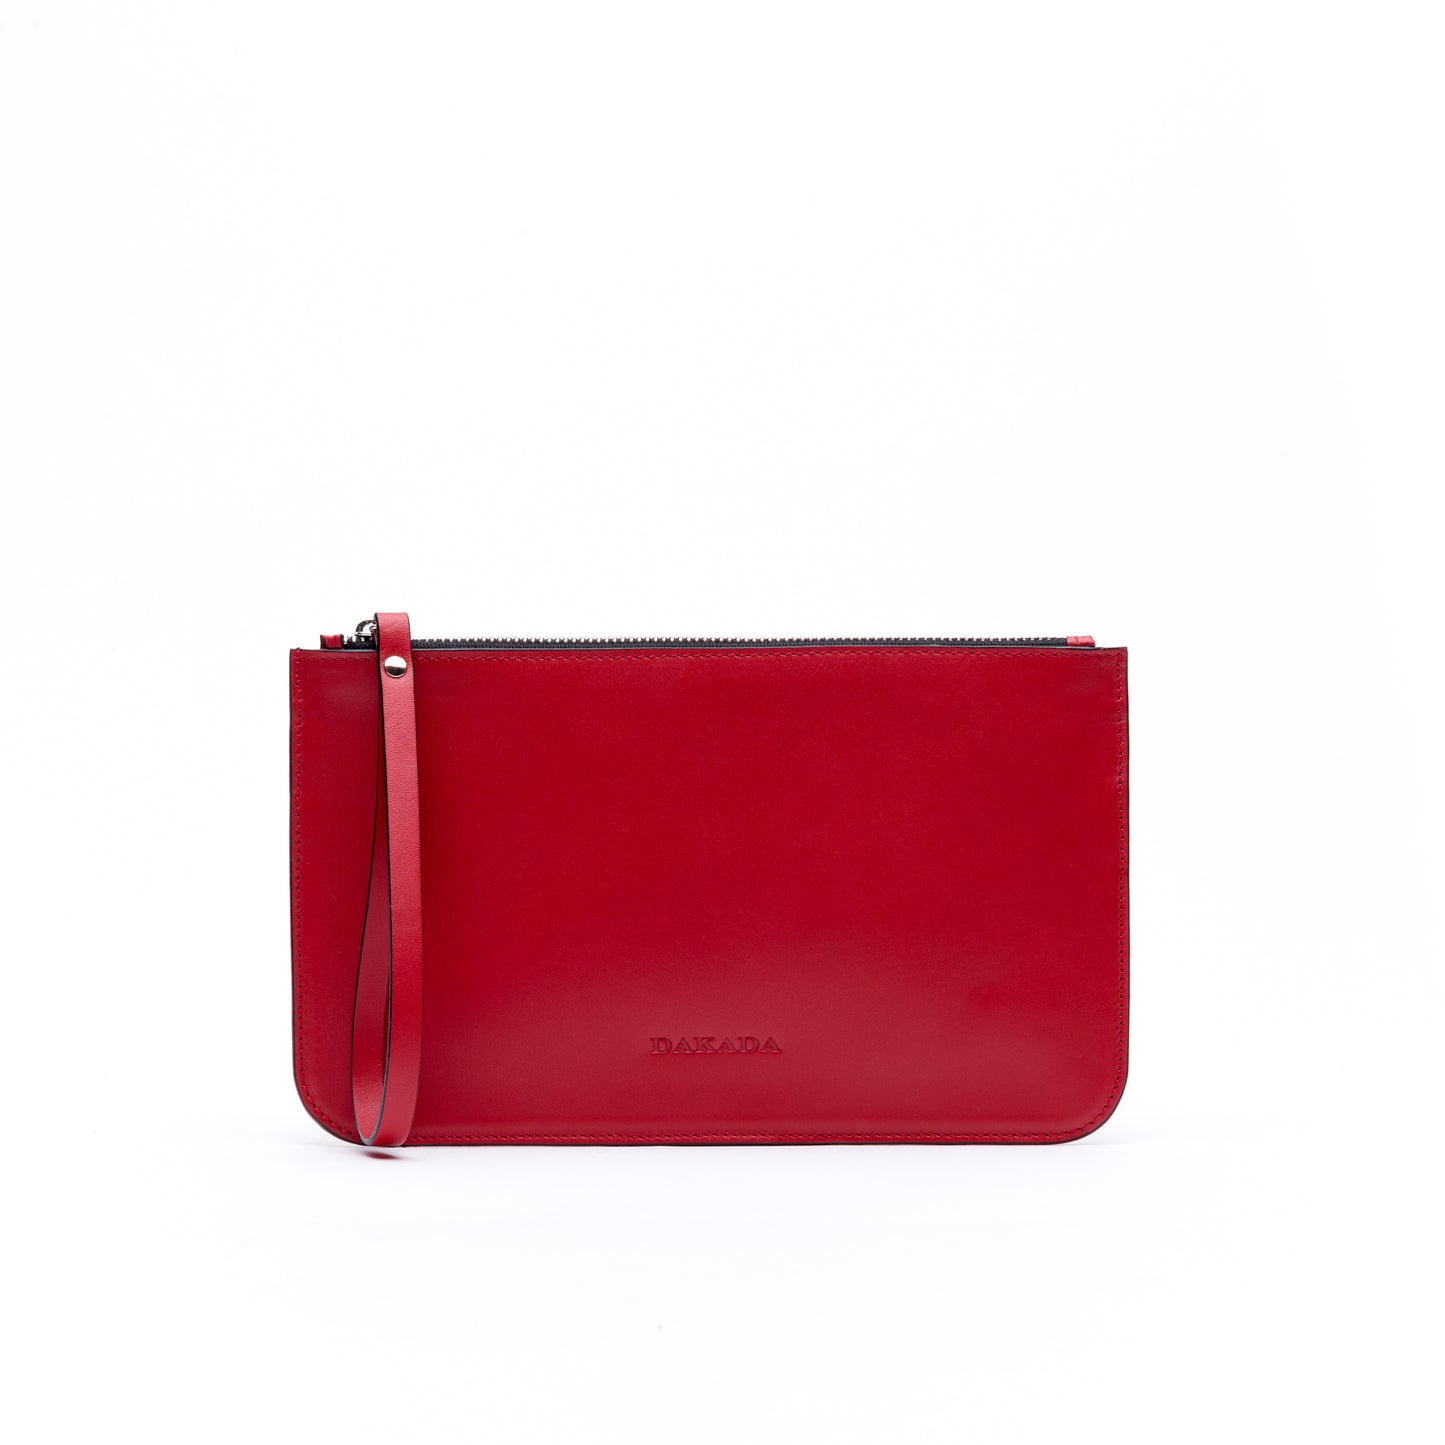 Brooklyn- Red Leather with Black Trim